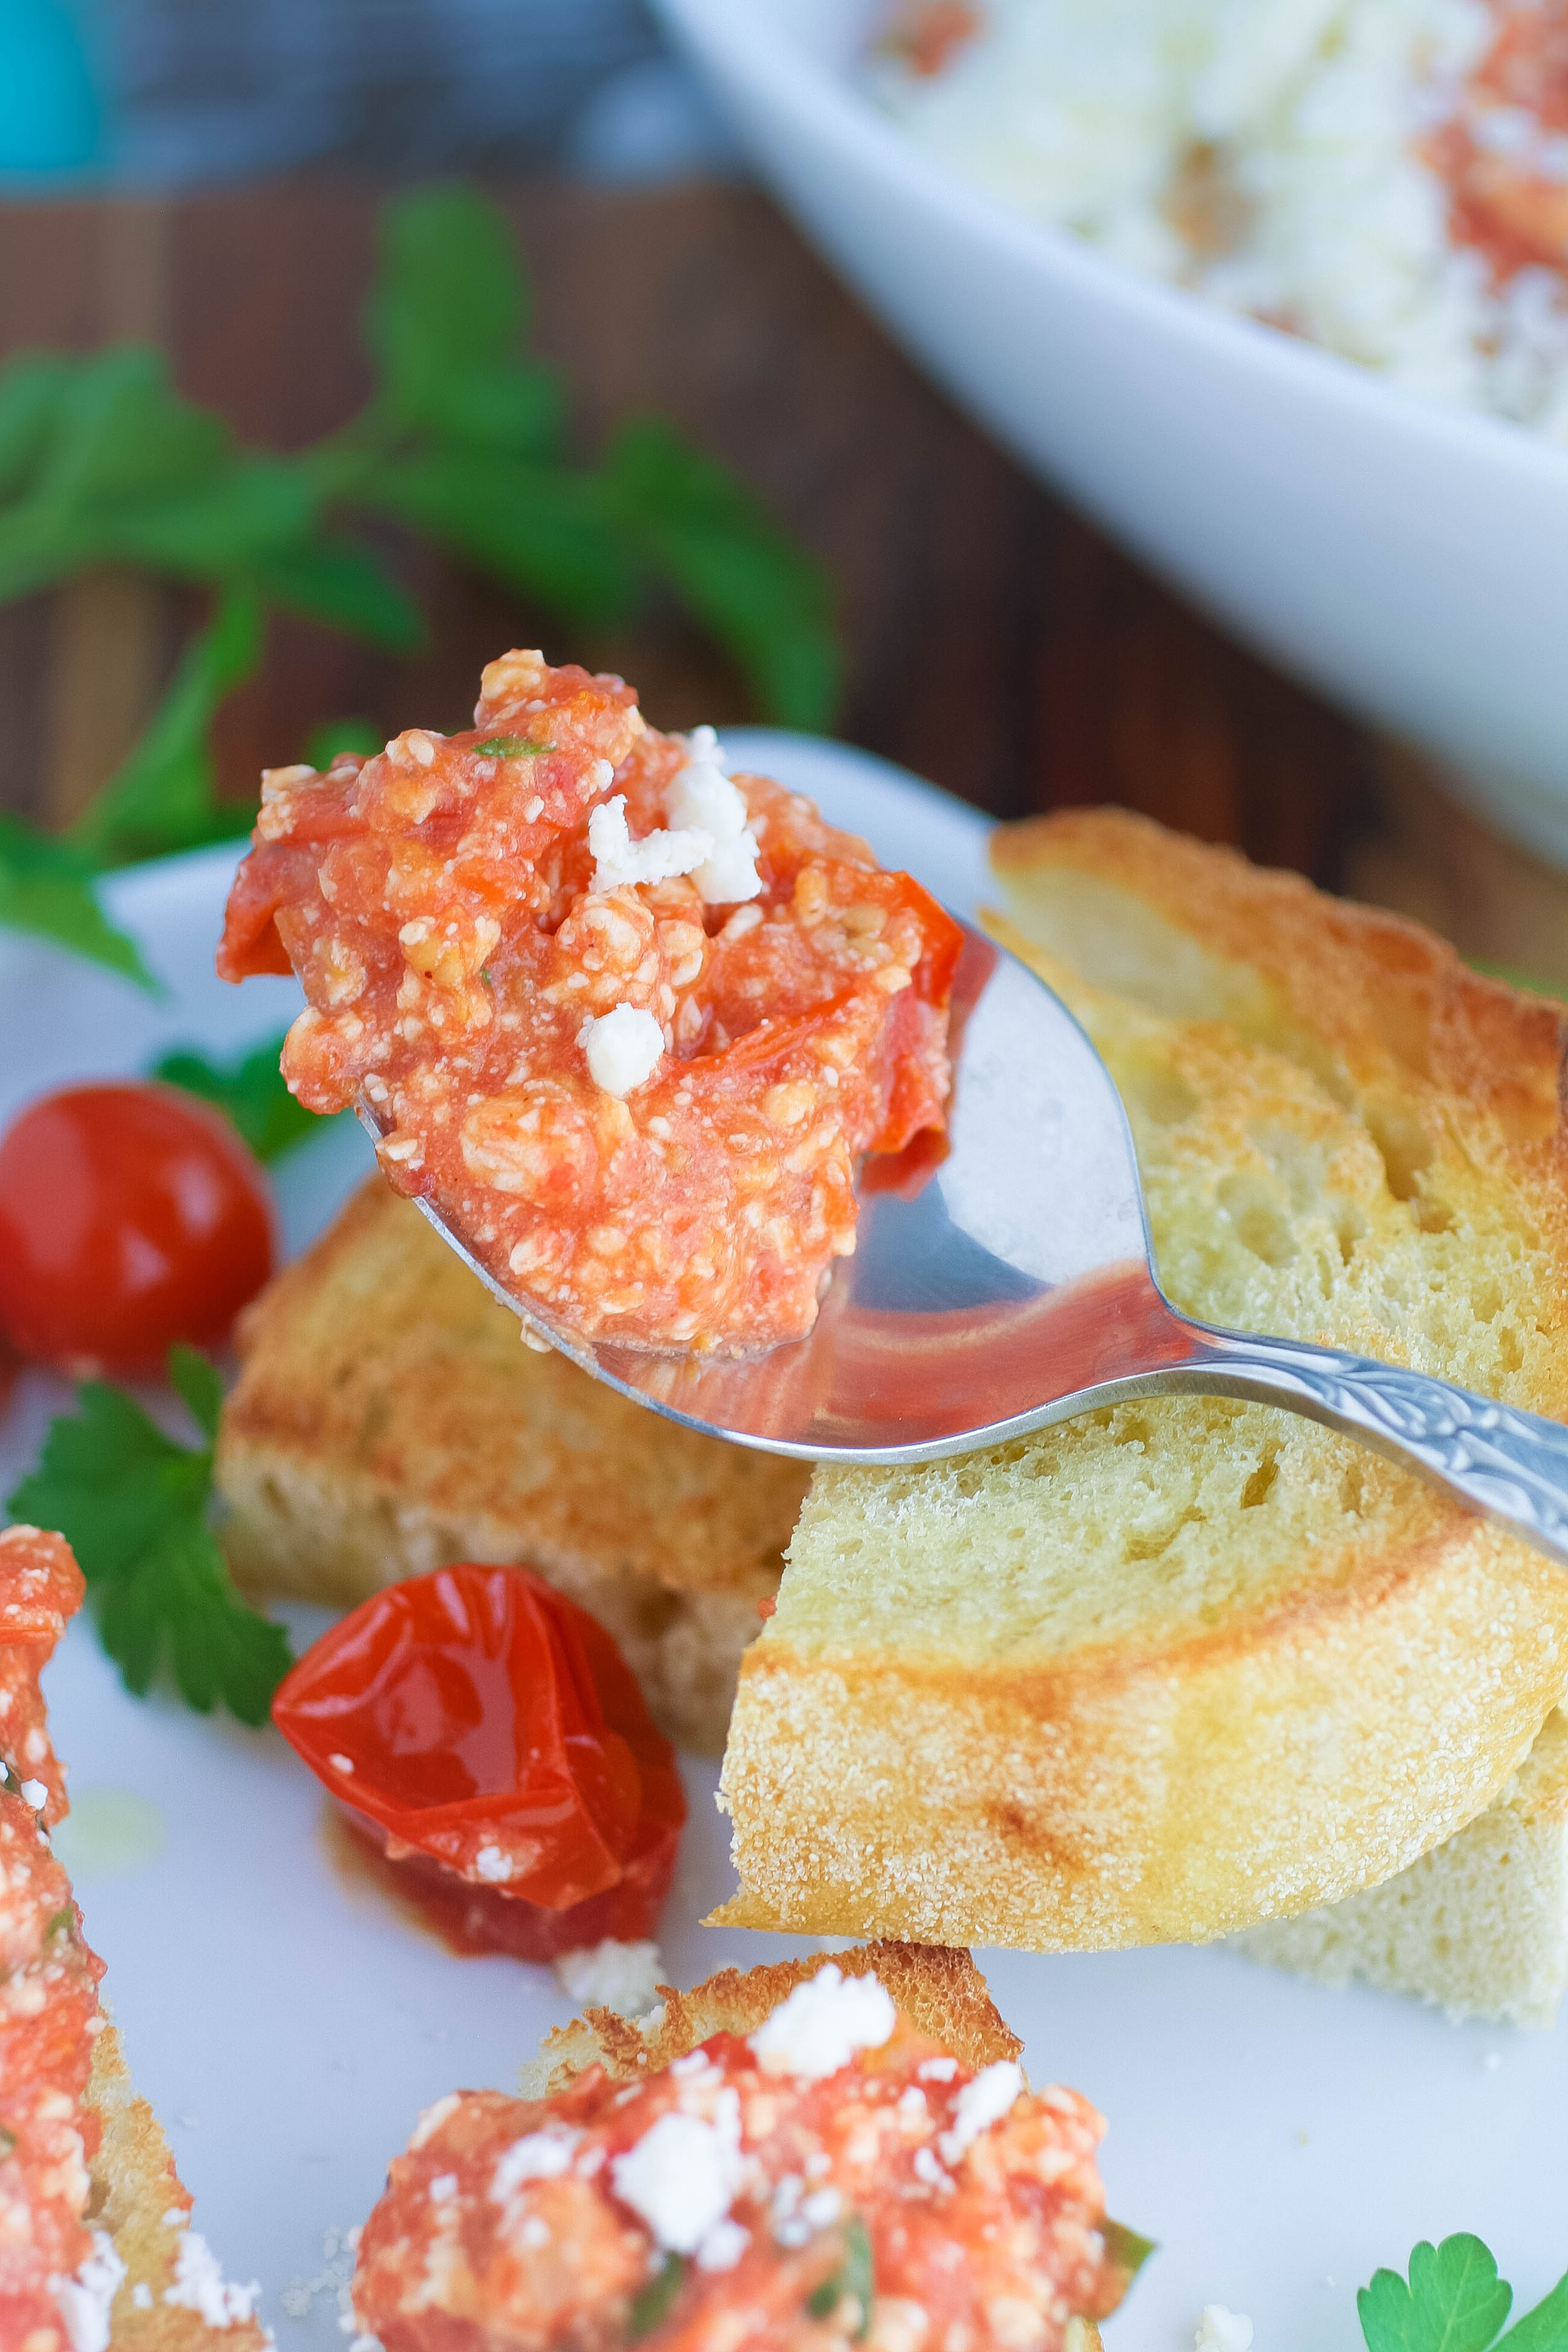 Roasted Tomato & Garlic and Feta Spread is a lovely appetizer for any season. You'll love the fresh flavors in Roasted Tomato & Garlic and Feta Spread.